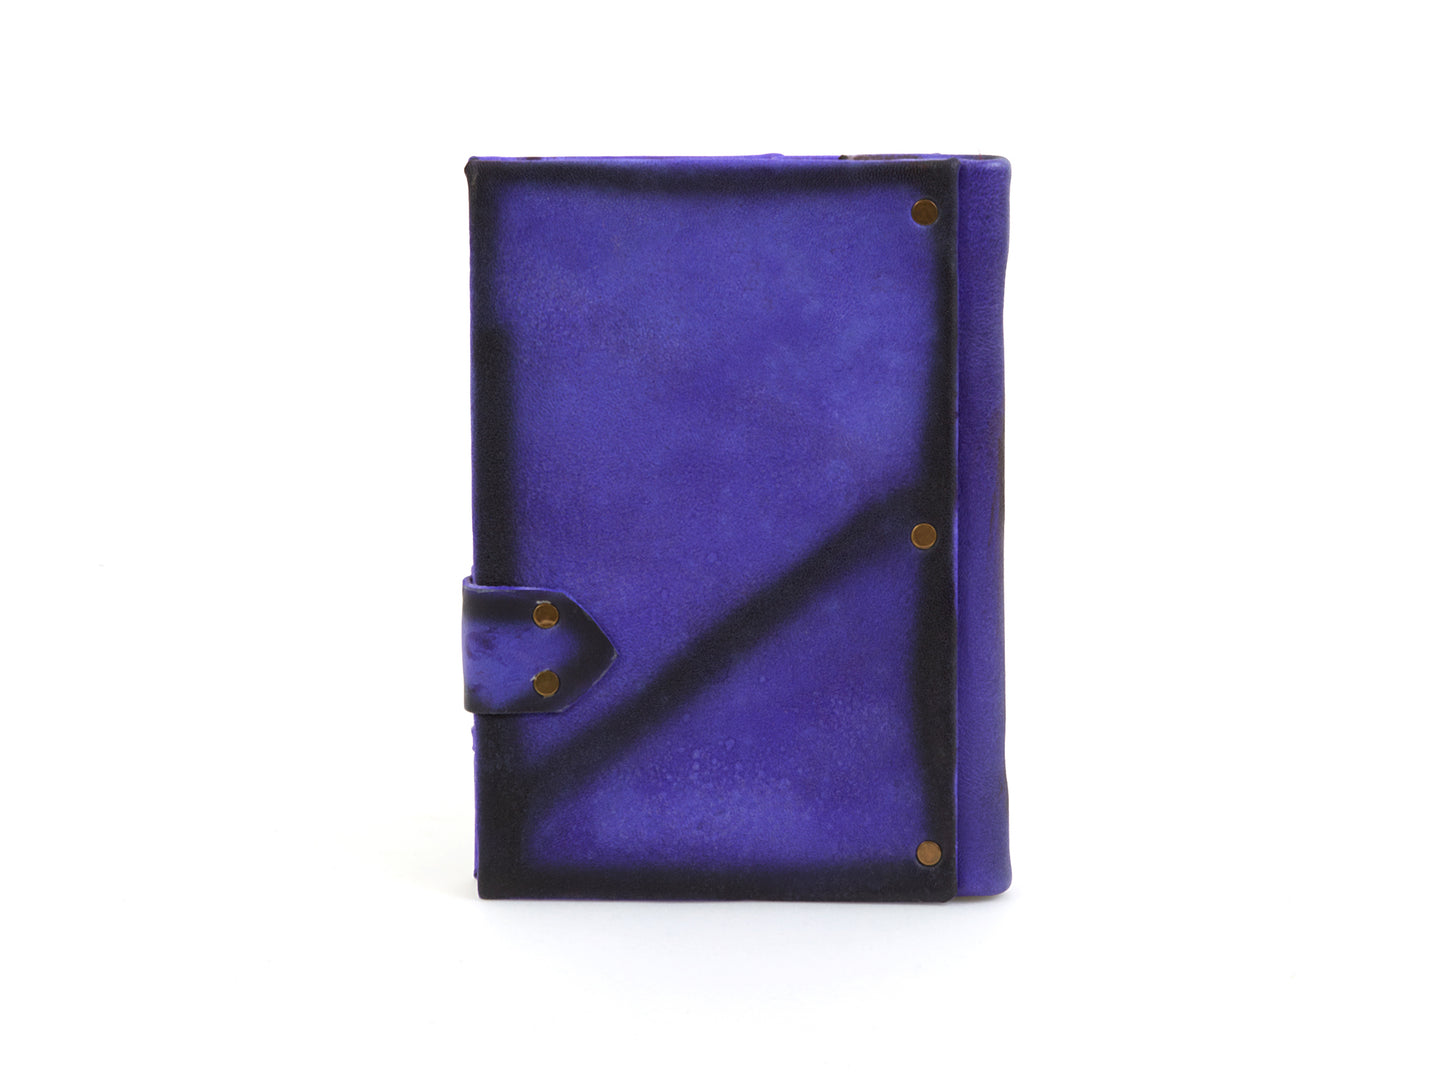 Purple Butterfly Design Craft Leather Journal Diary Notebook